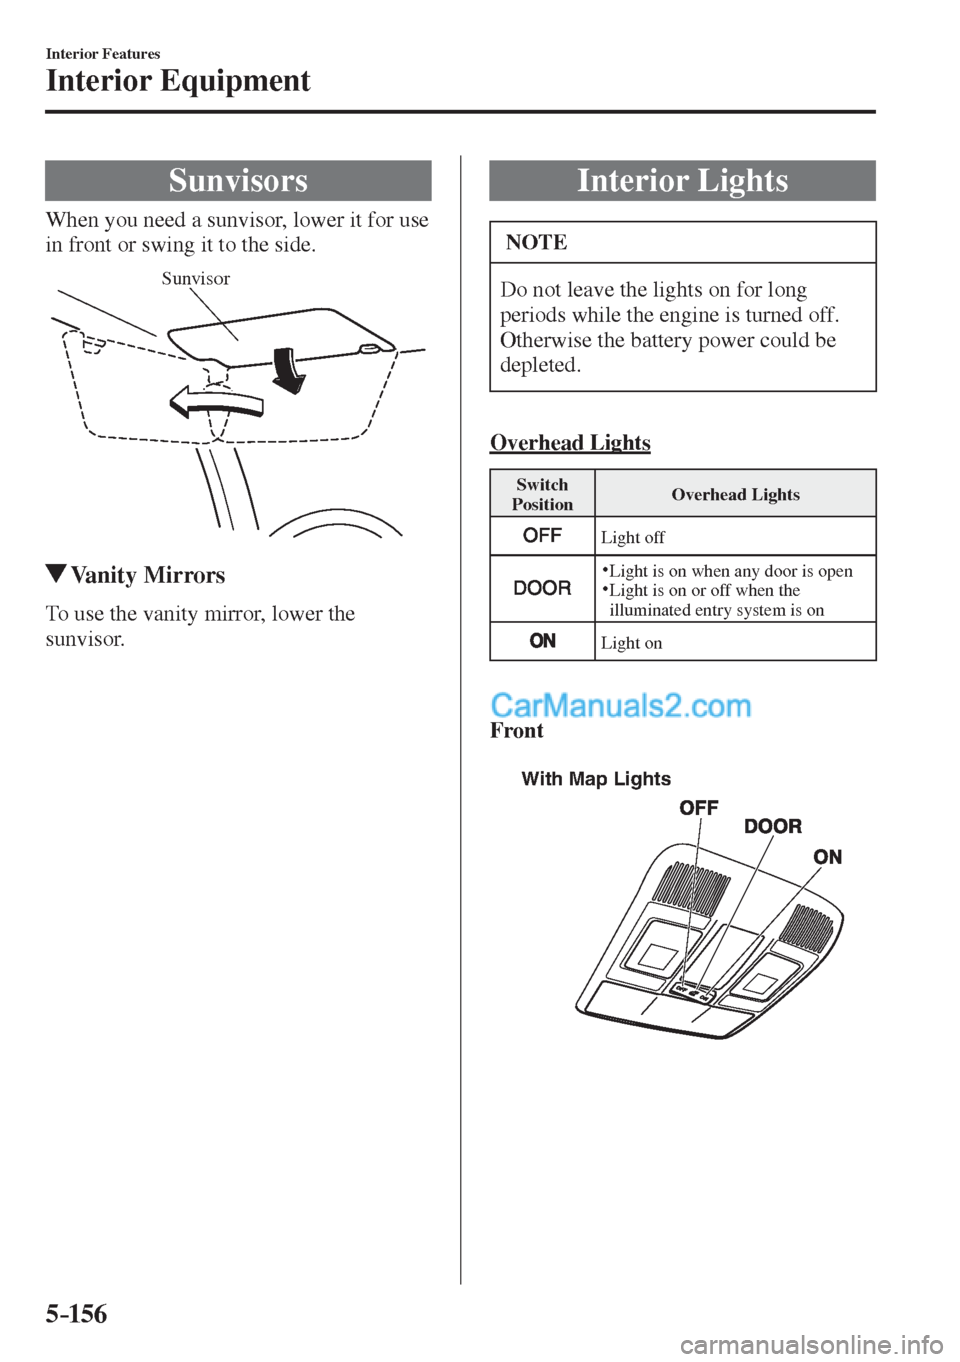 MAZDA MODEL 2 2017  Owners Manual (in English) 5–156
Interior Features
Interior Equipment
      Sunvisors
            When  you  need  a  sunvisor,  lower  it  for  use 
in front or swing it to the side.
 
Sunvisor
 
         Vanity  Mirrors
   